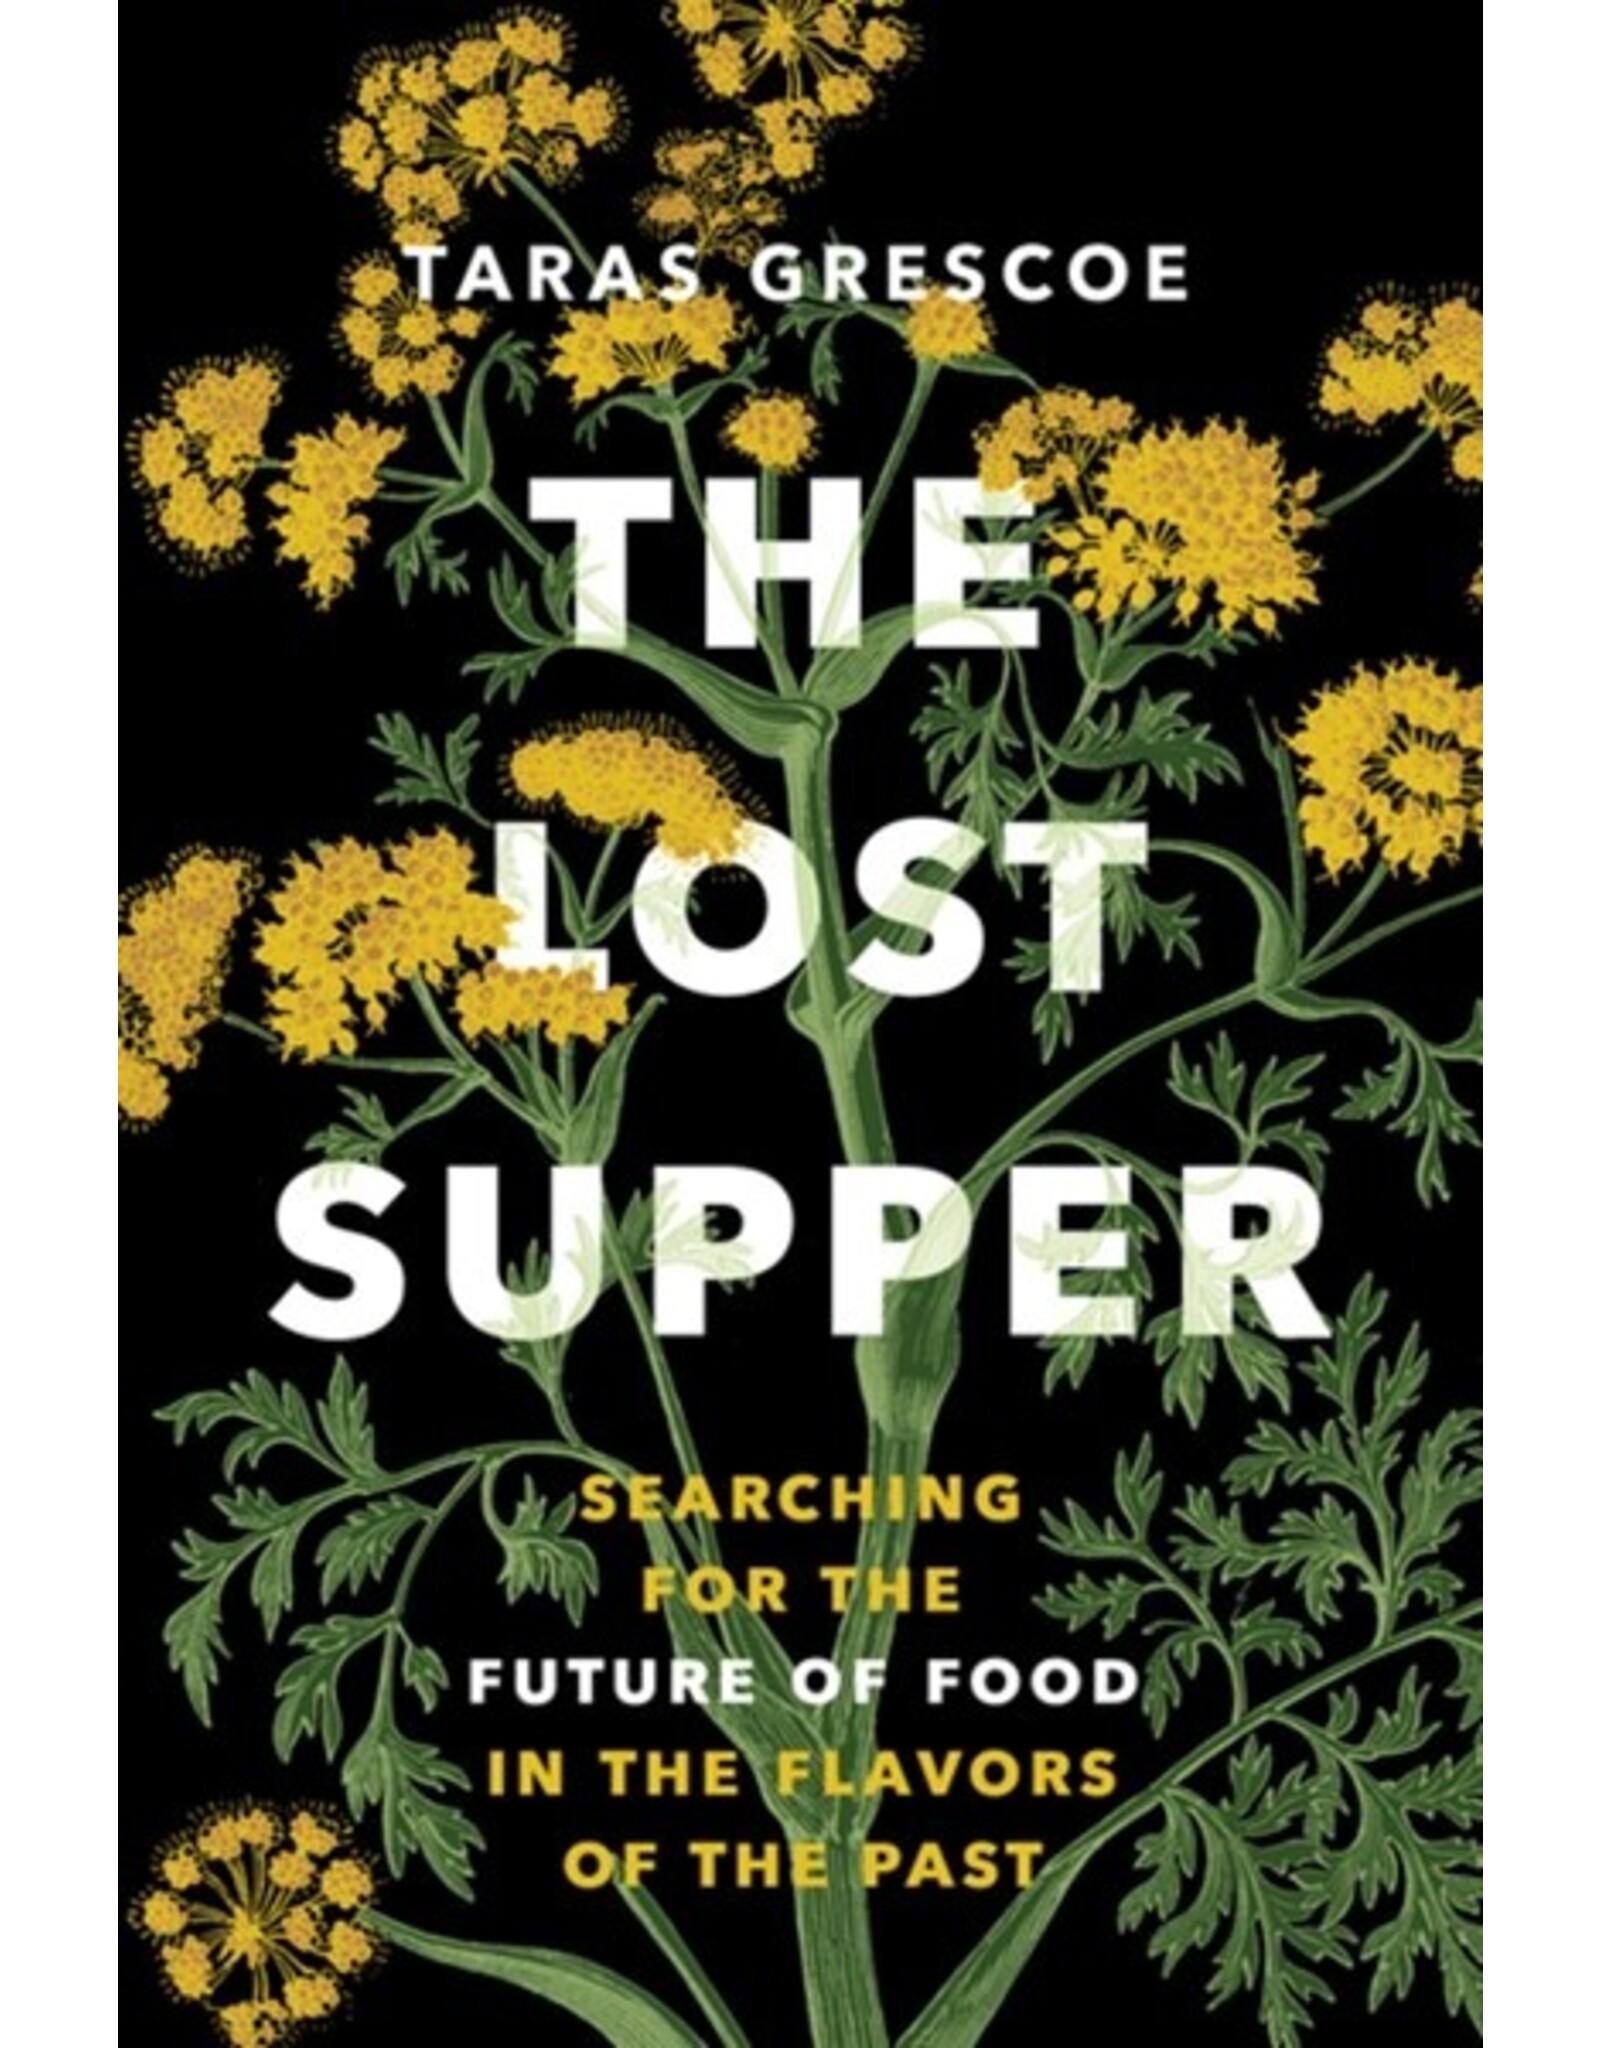 Books The Lost Supper : Searching for the Future of Food in the Flavors of the Past by Taras Grescoe